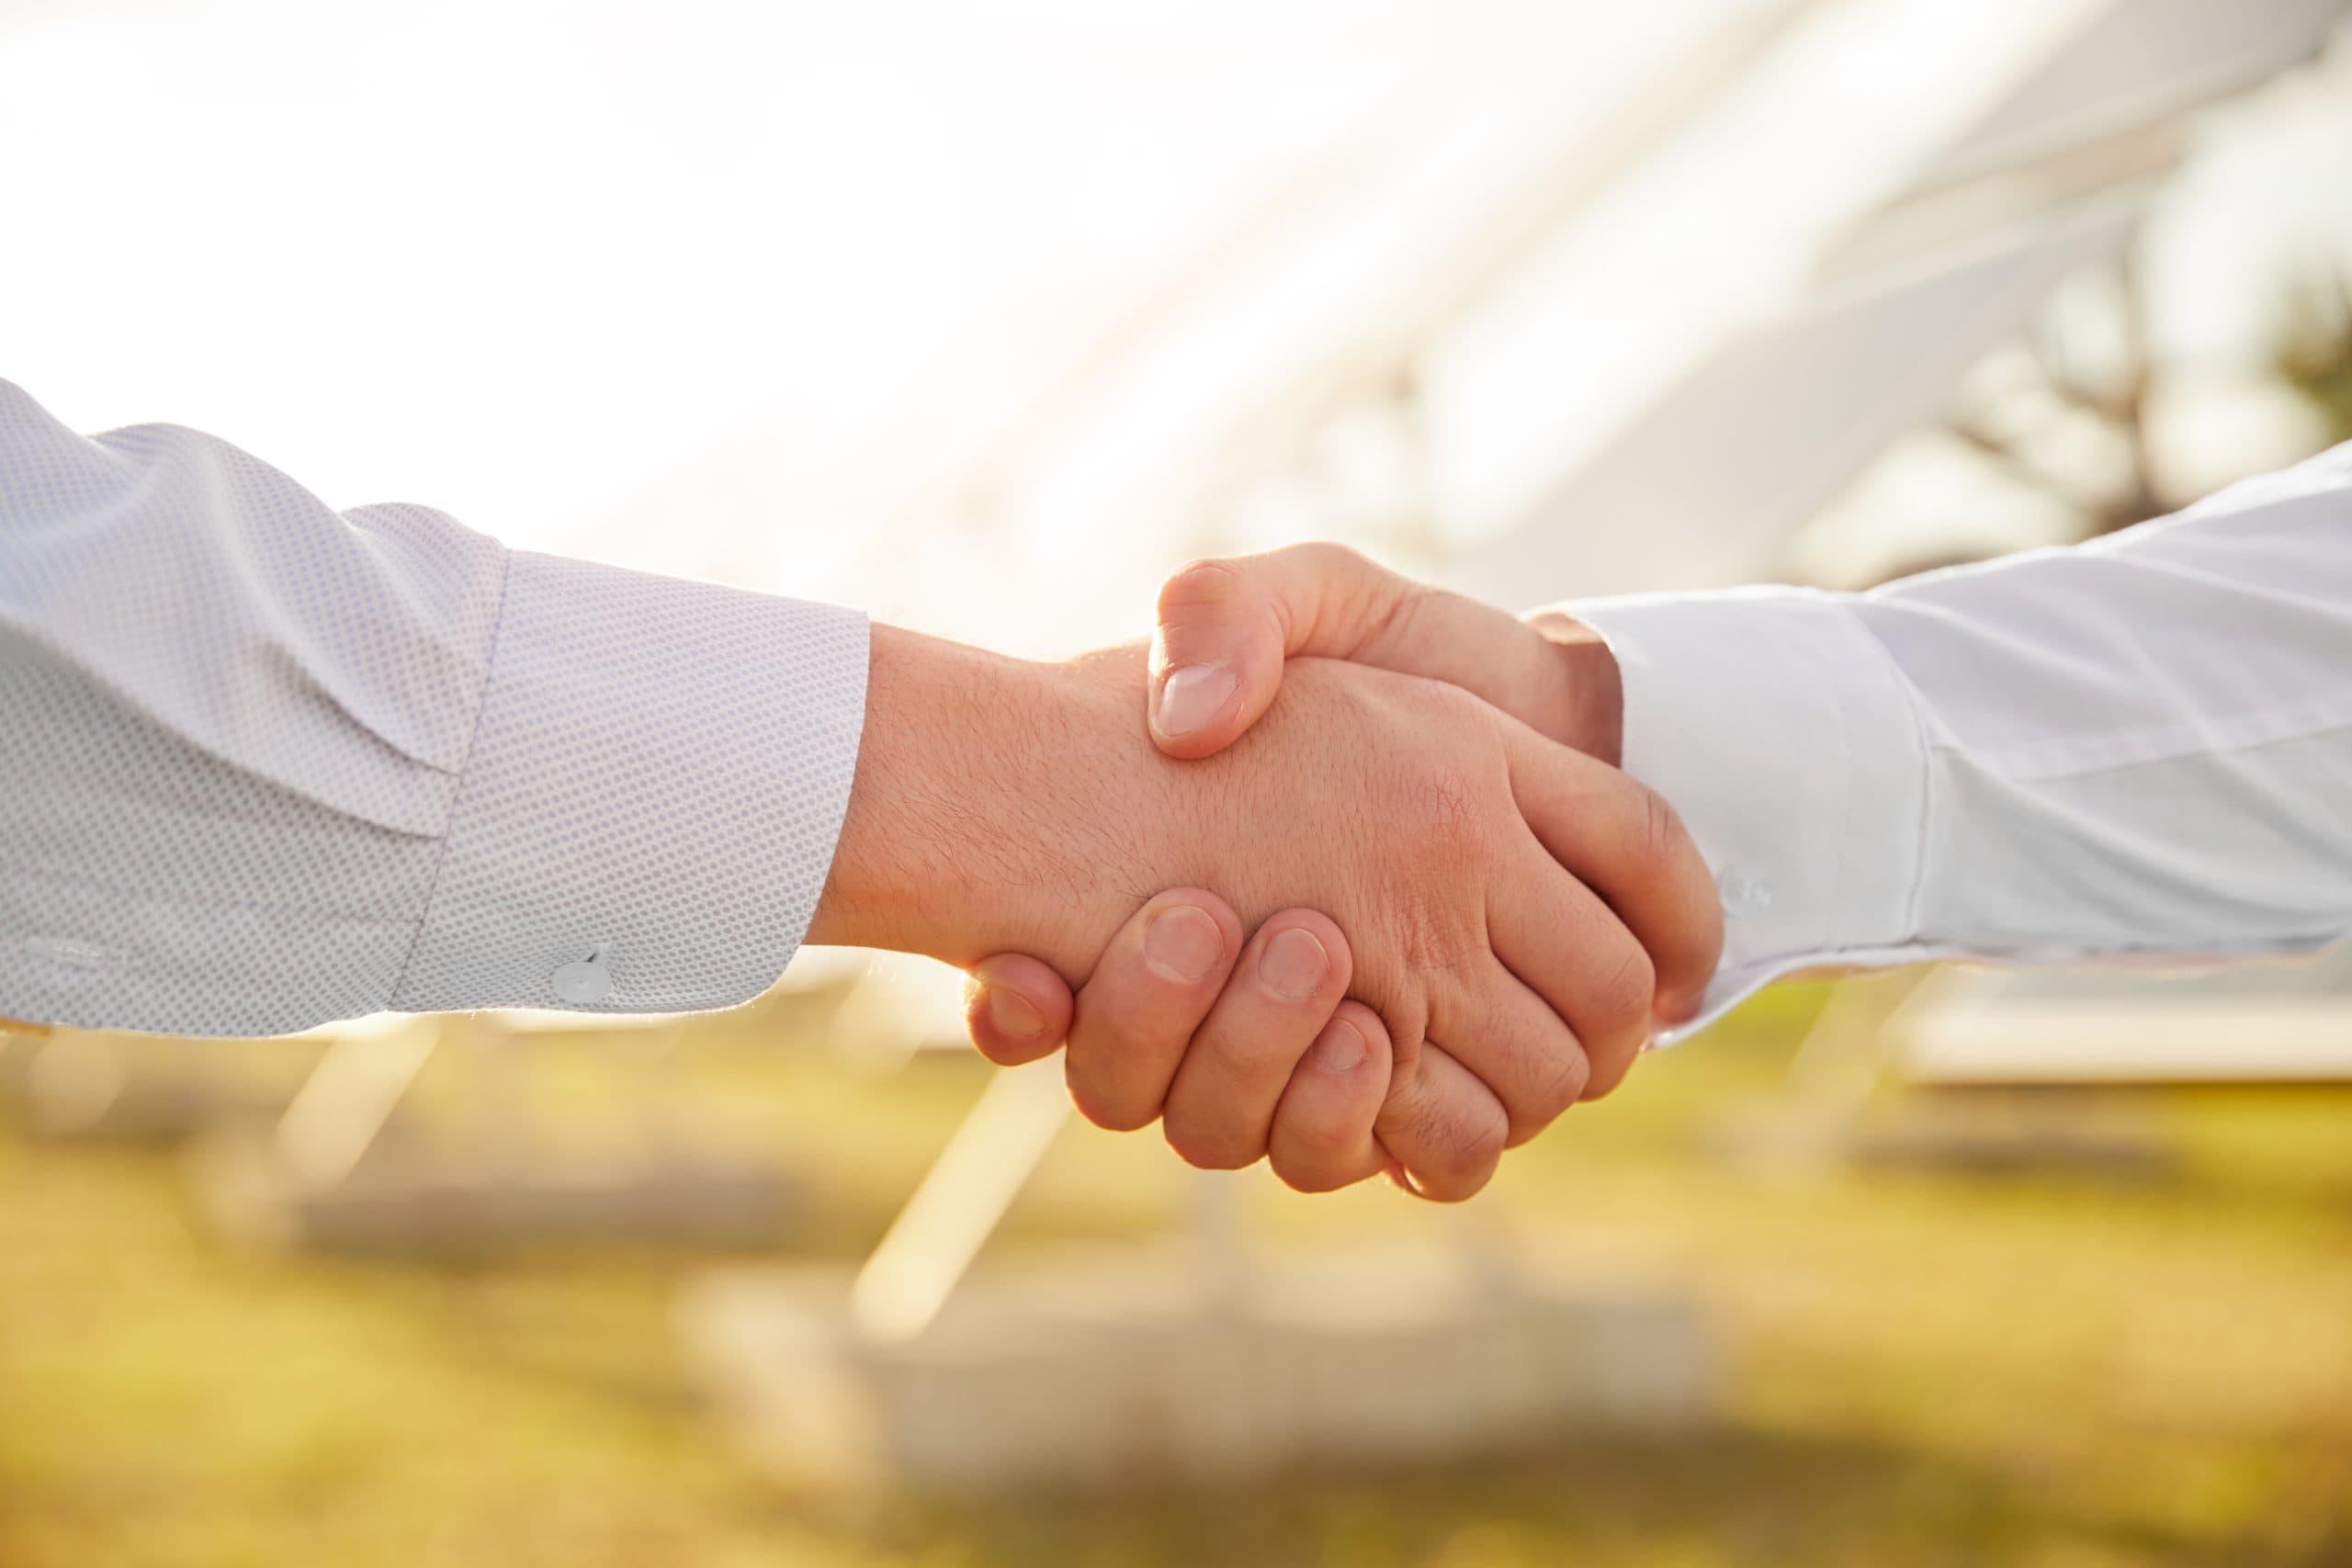 Two people are shaking hands on a bright day